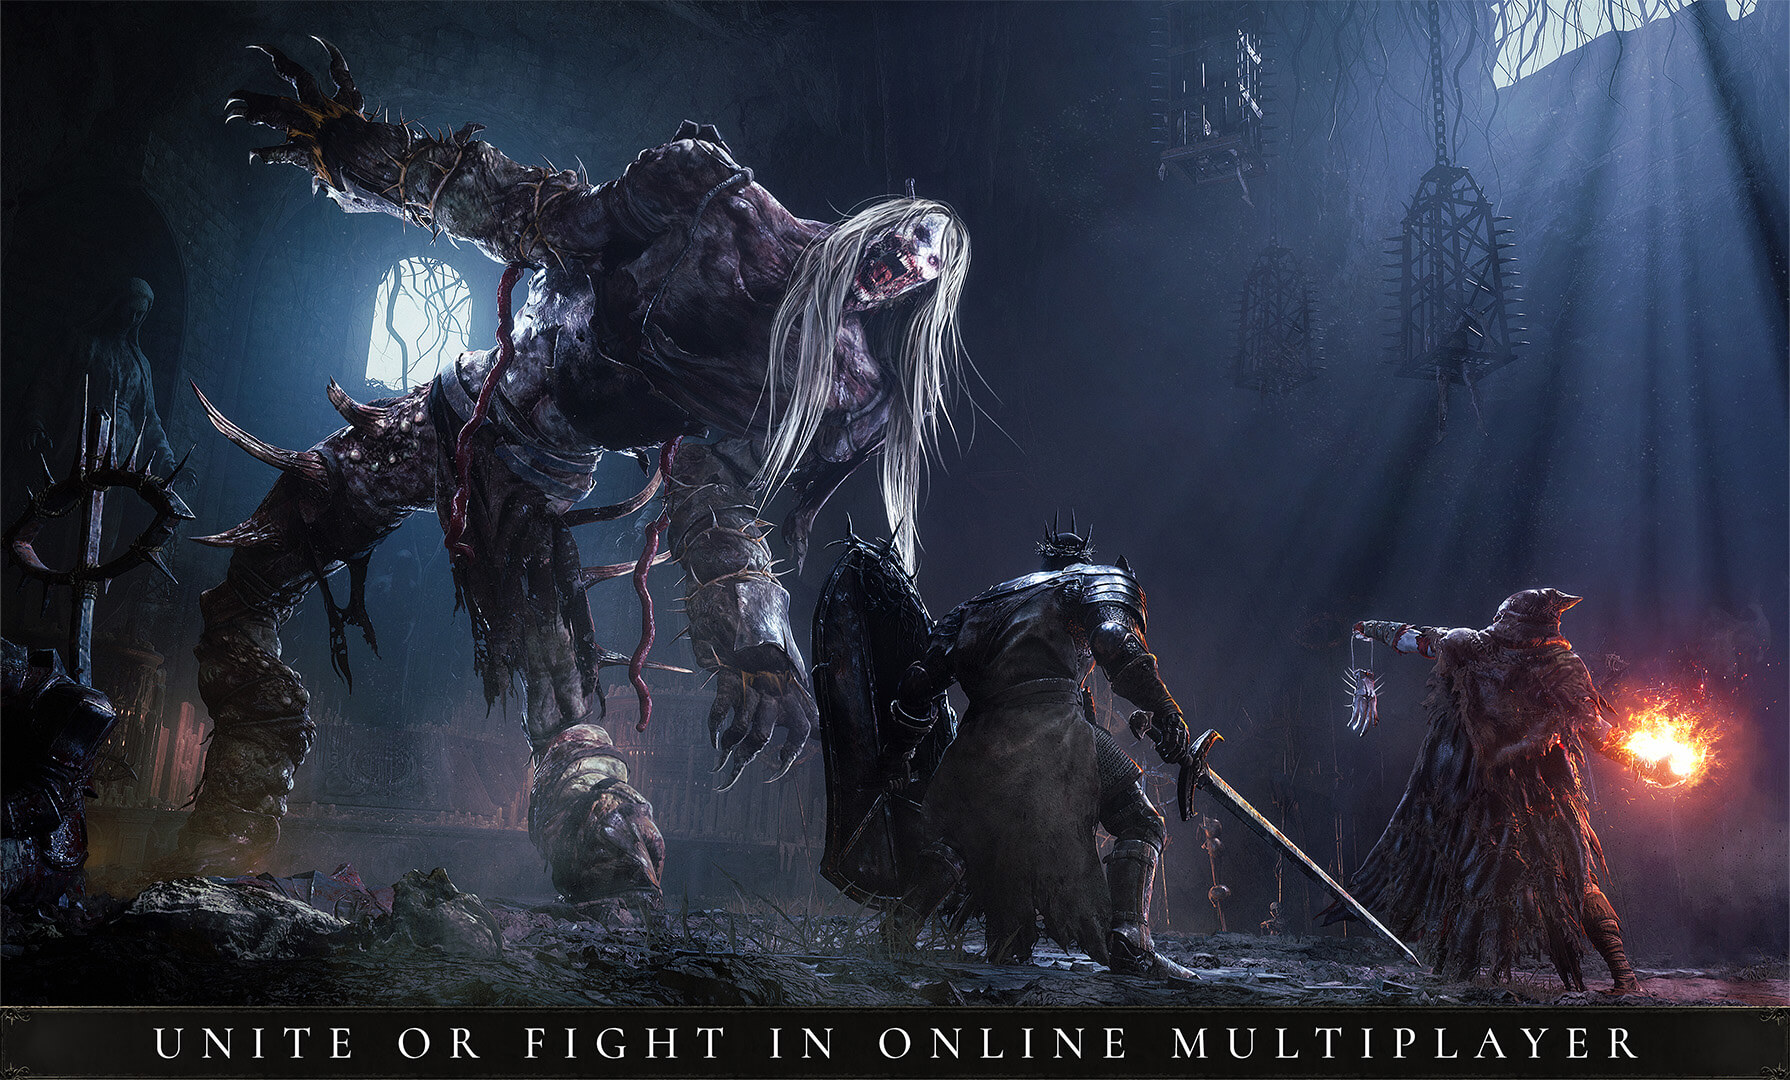 Unite or Fight in Online Multiplayer